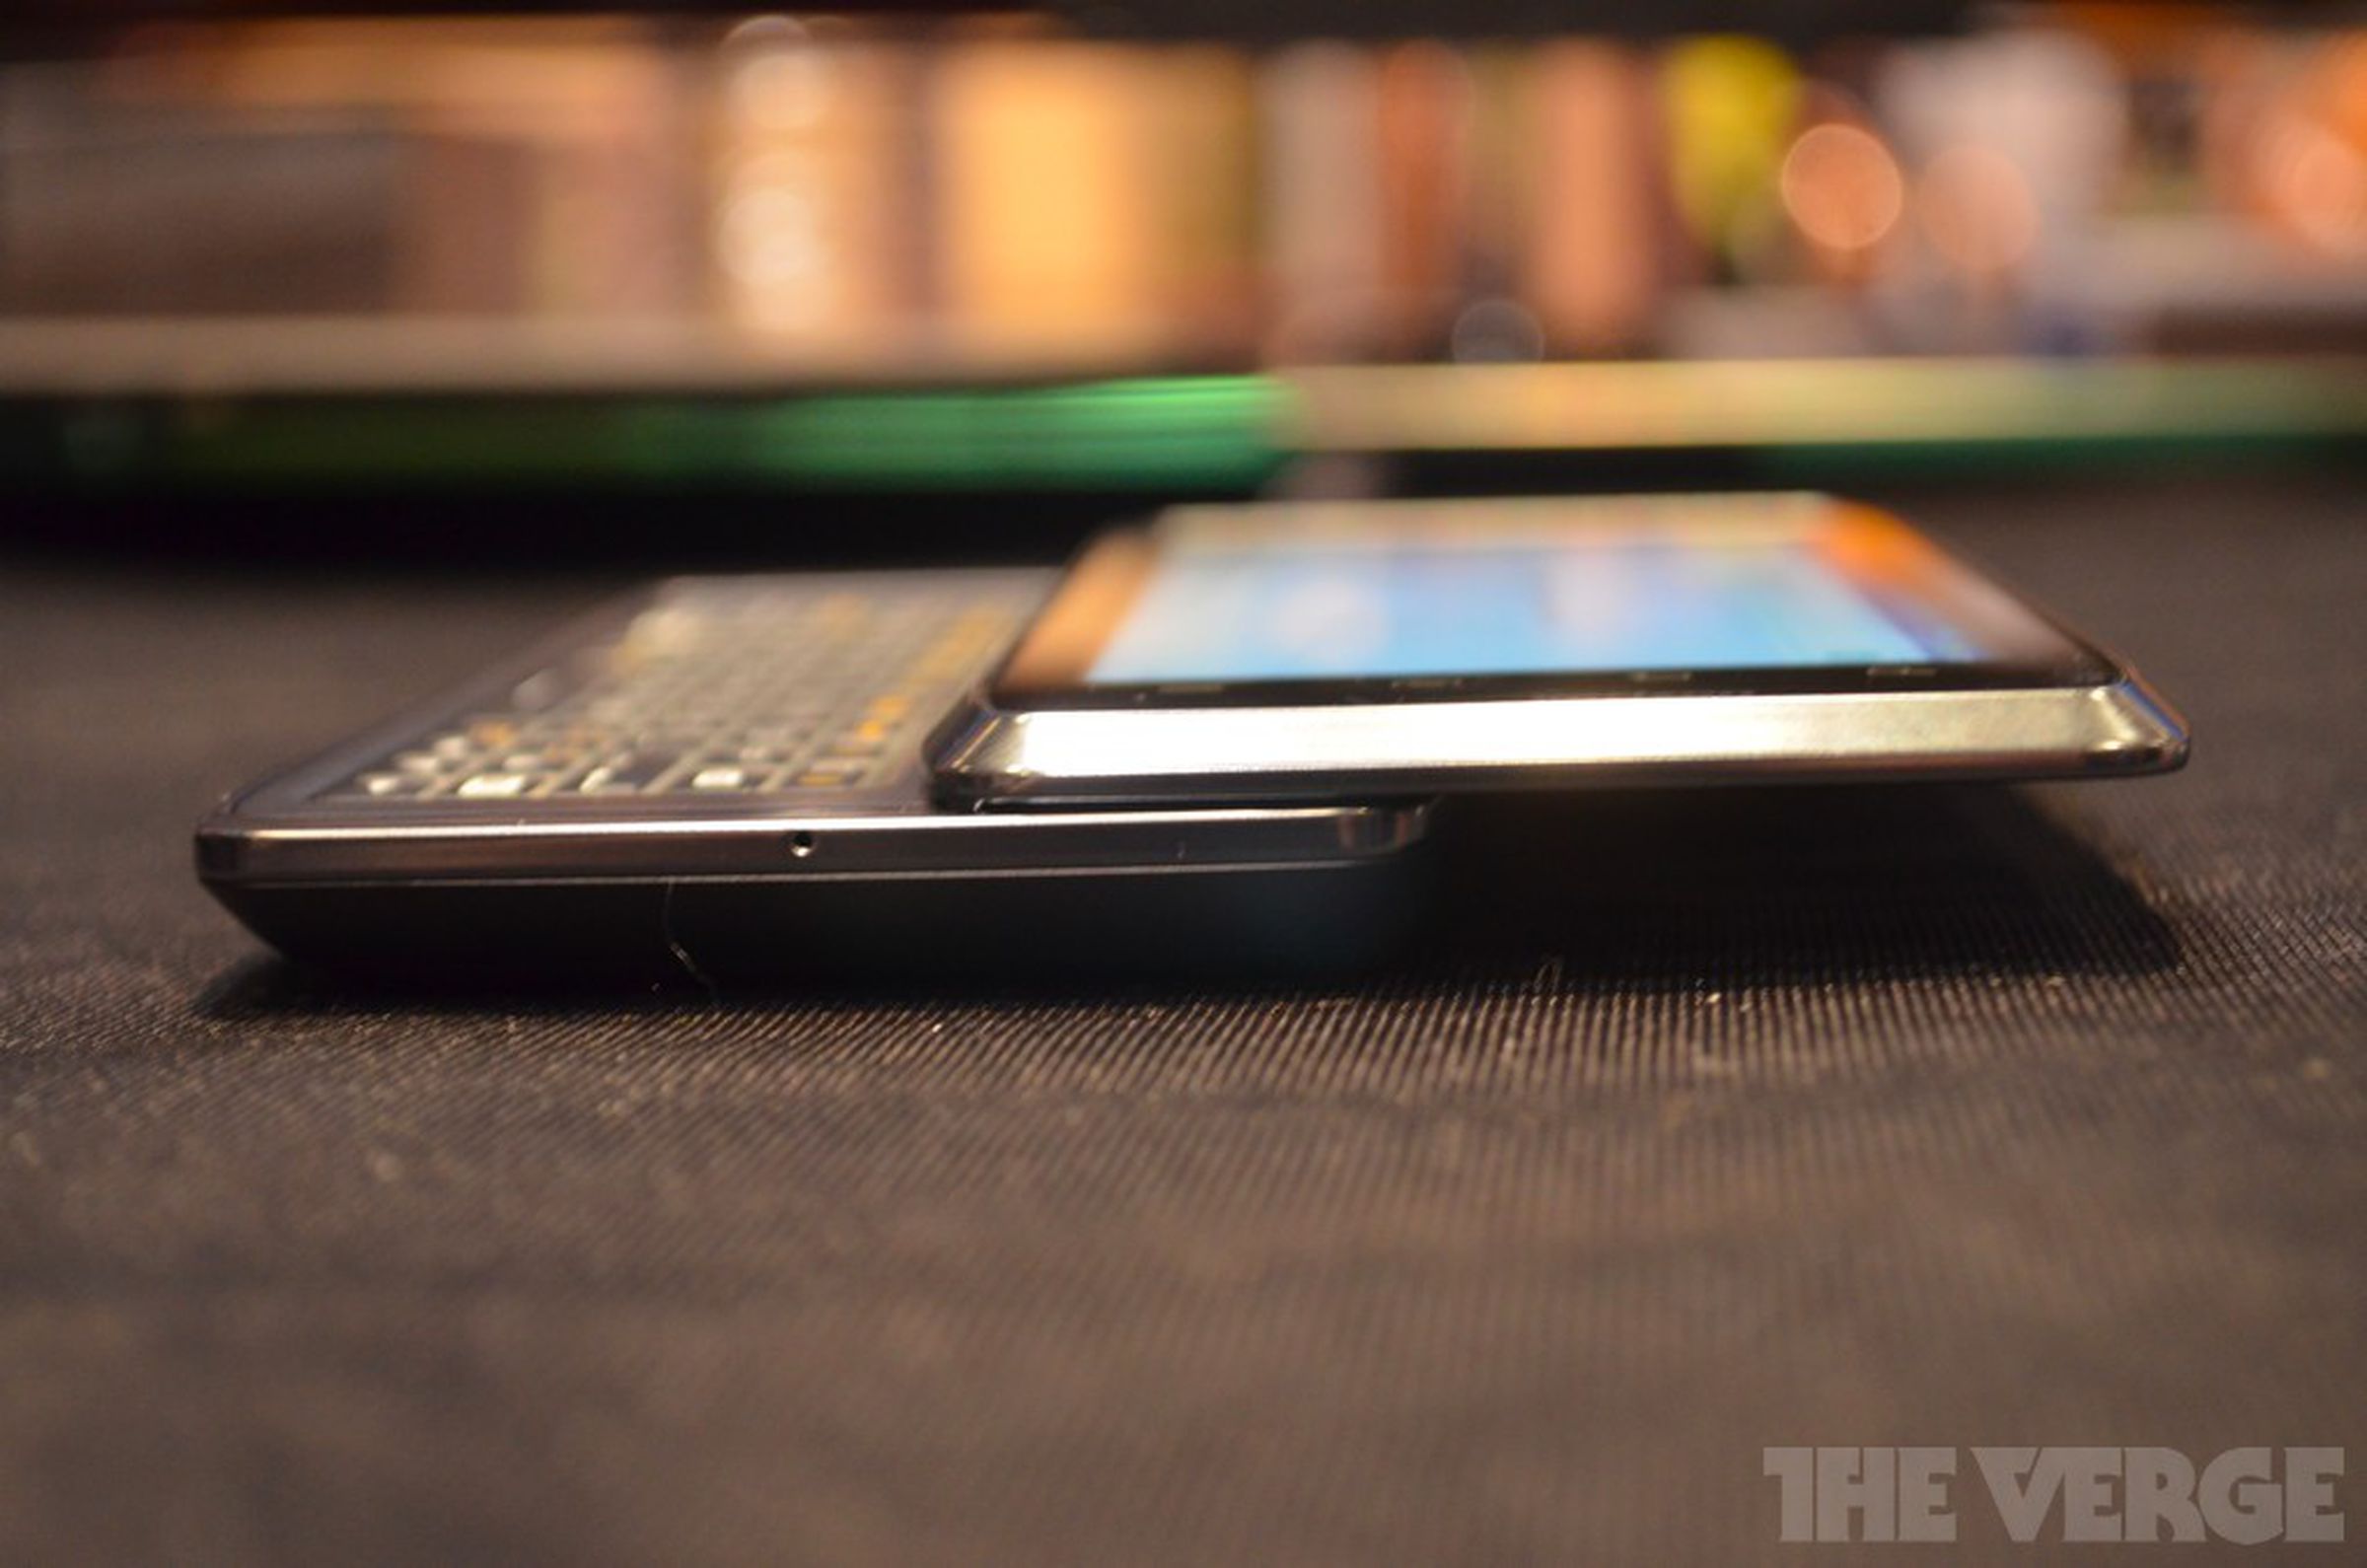 Motorola Droid 4 hands-on pictures